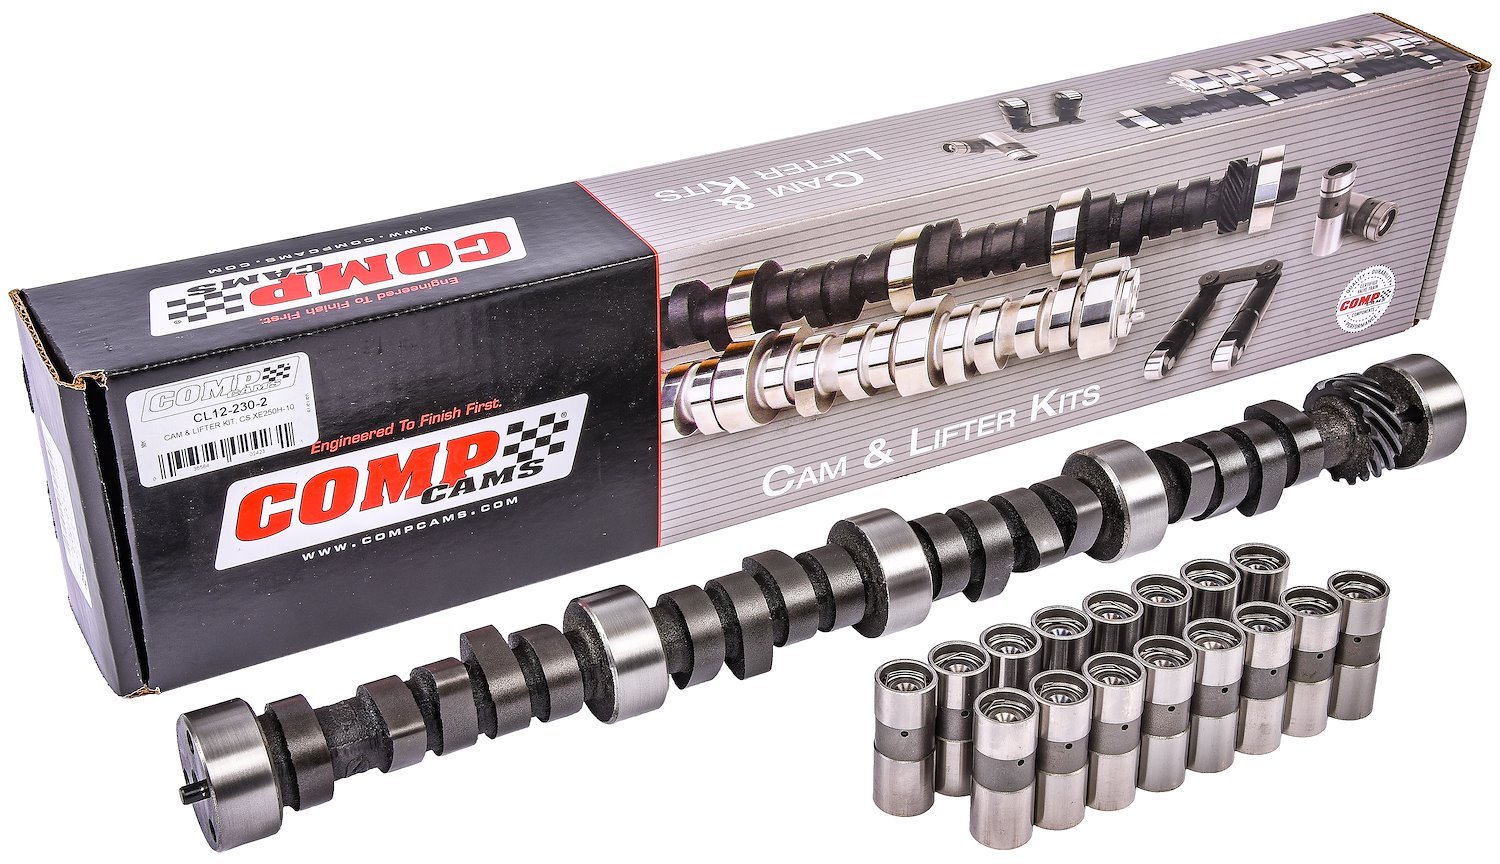 Xtreme Energy 250H Hydraulic Flat Tappet Camshaft & Lifter Kit Lift: .432" /.444" Duration: 250°/260° RPM Range: 600-4600